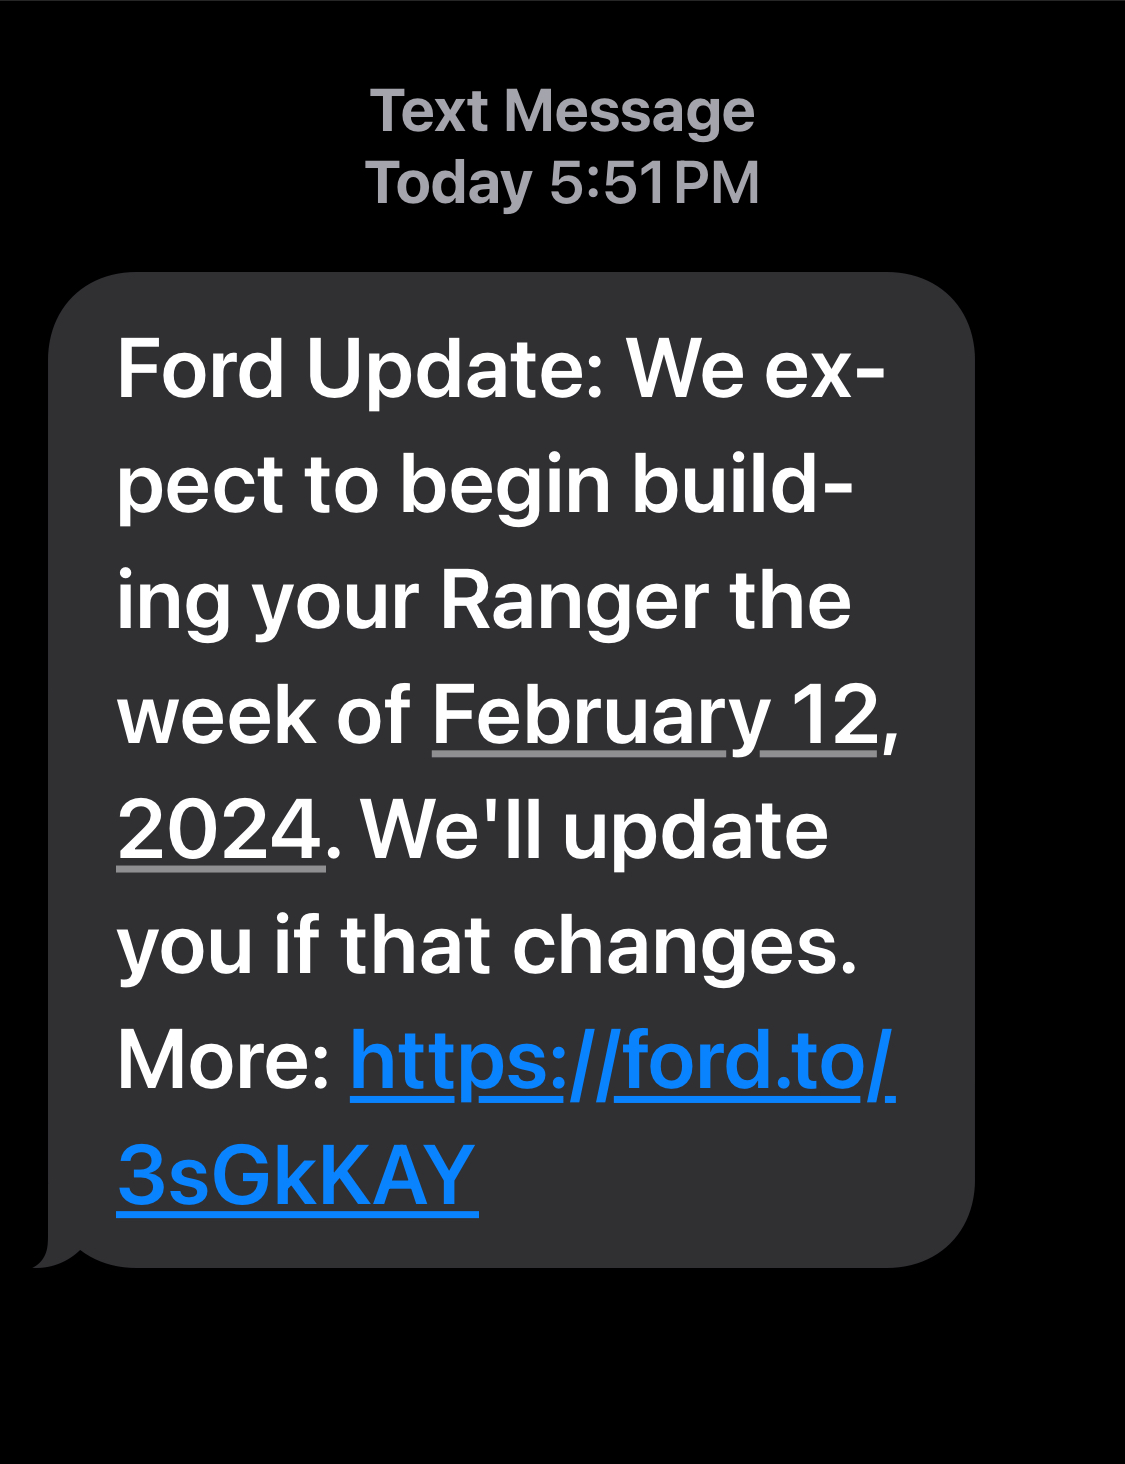 Ford Ranger Update from ford. IMG_3215